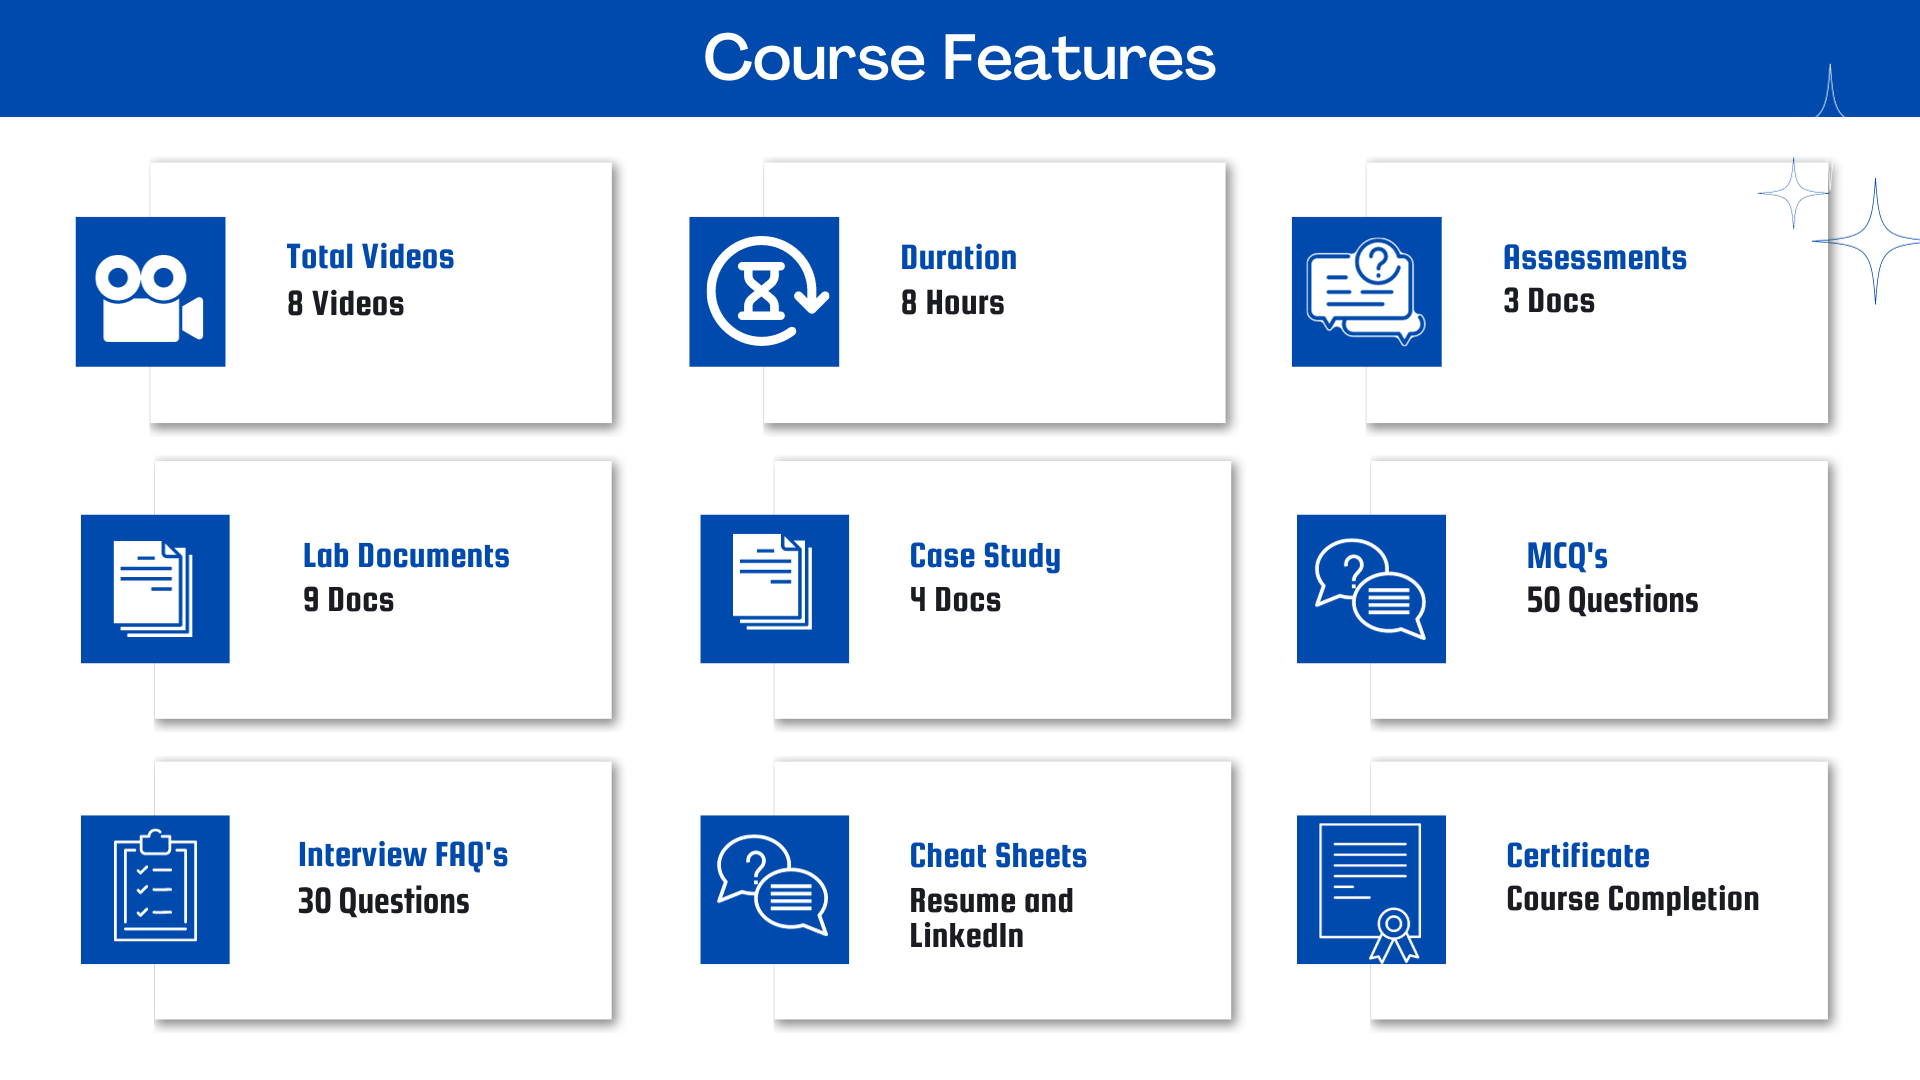 Workday LMS Course Features